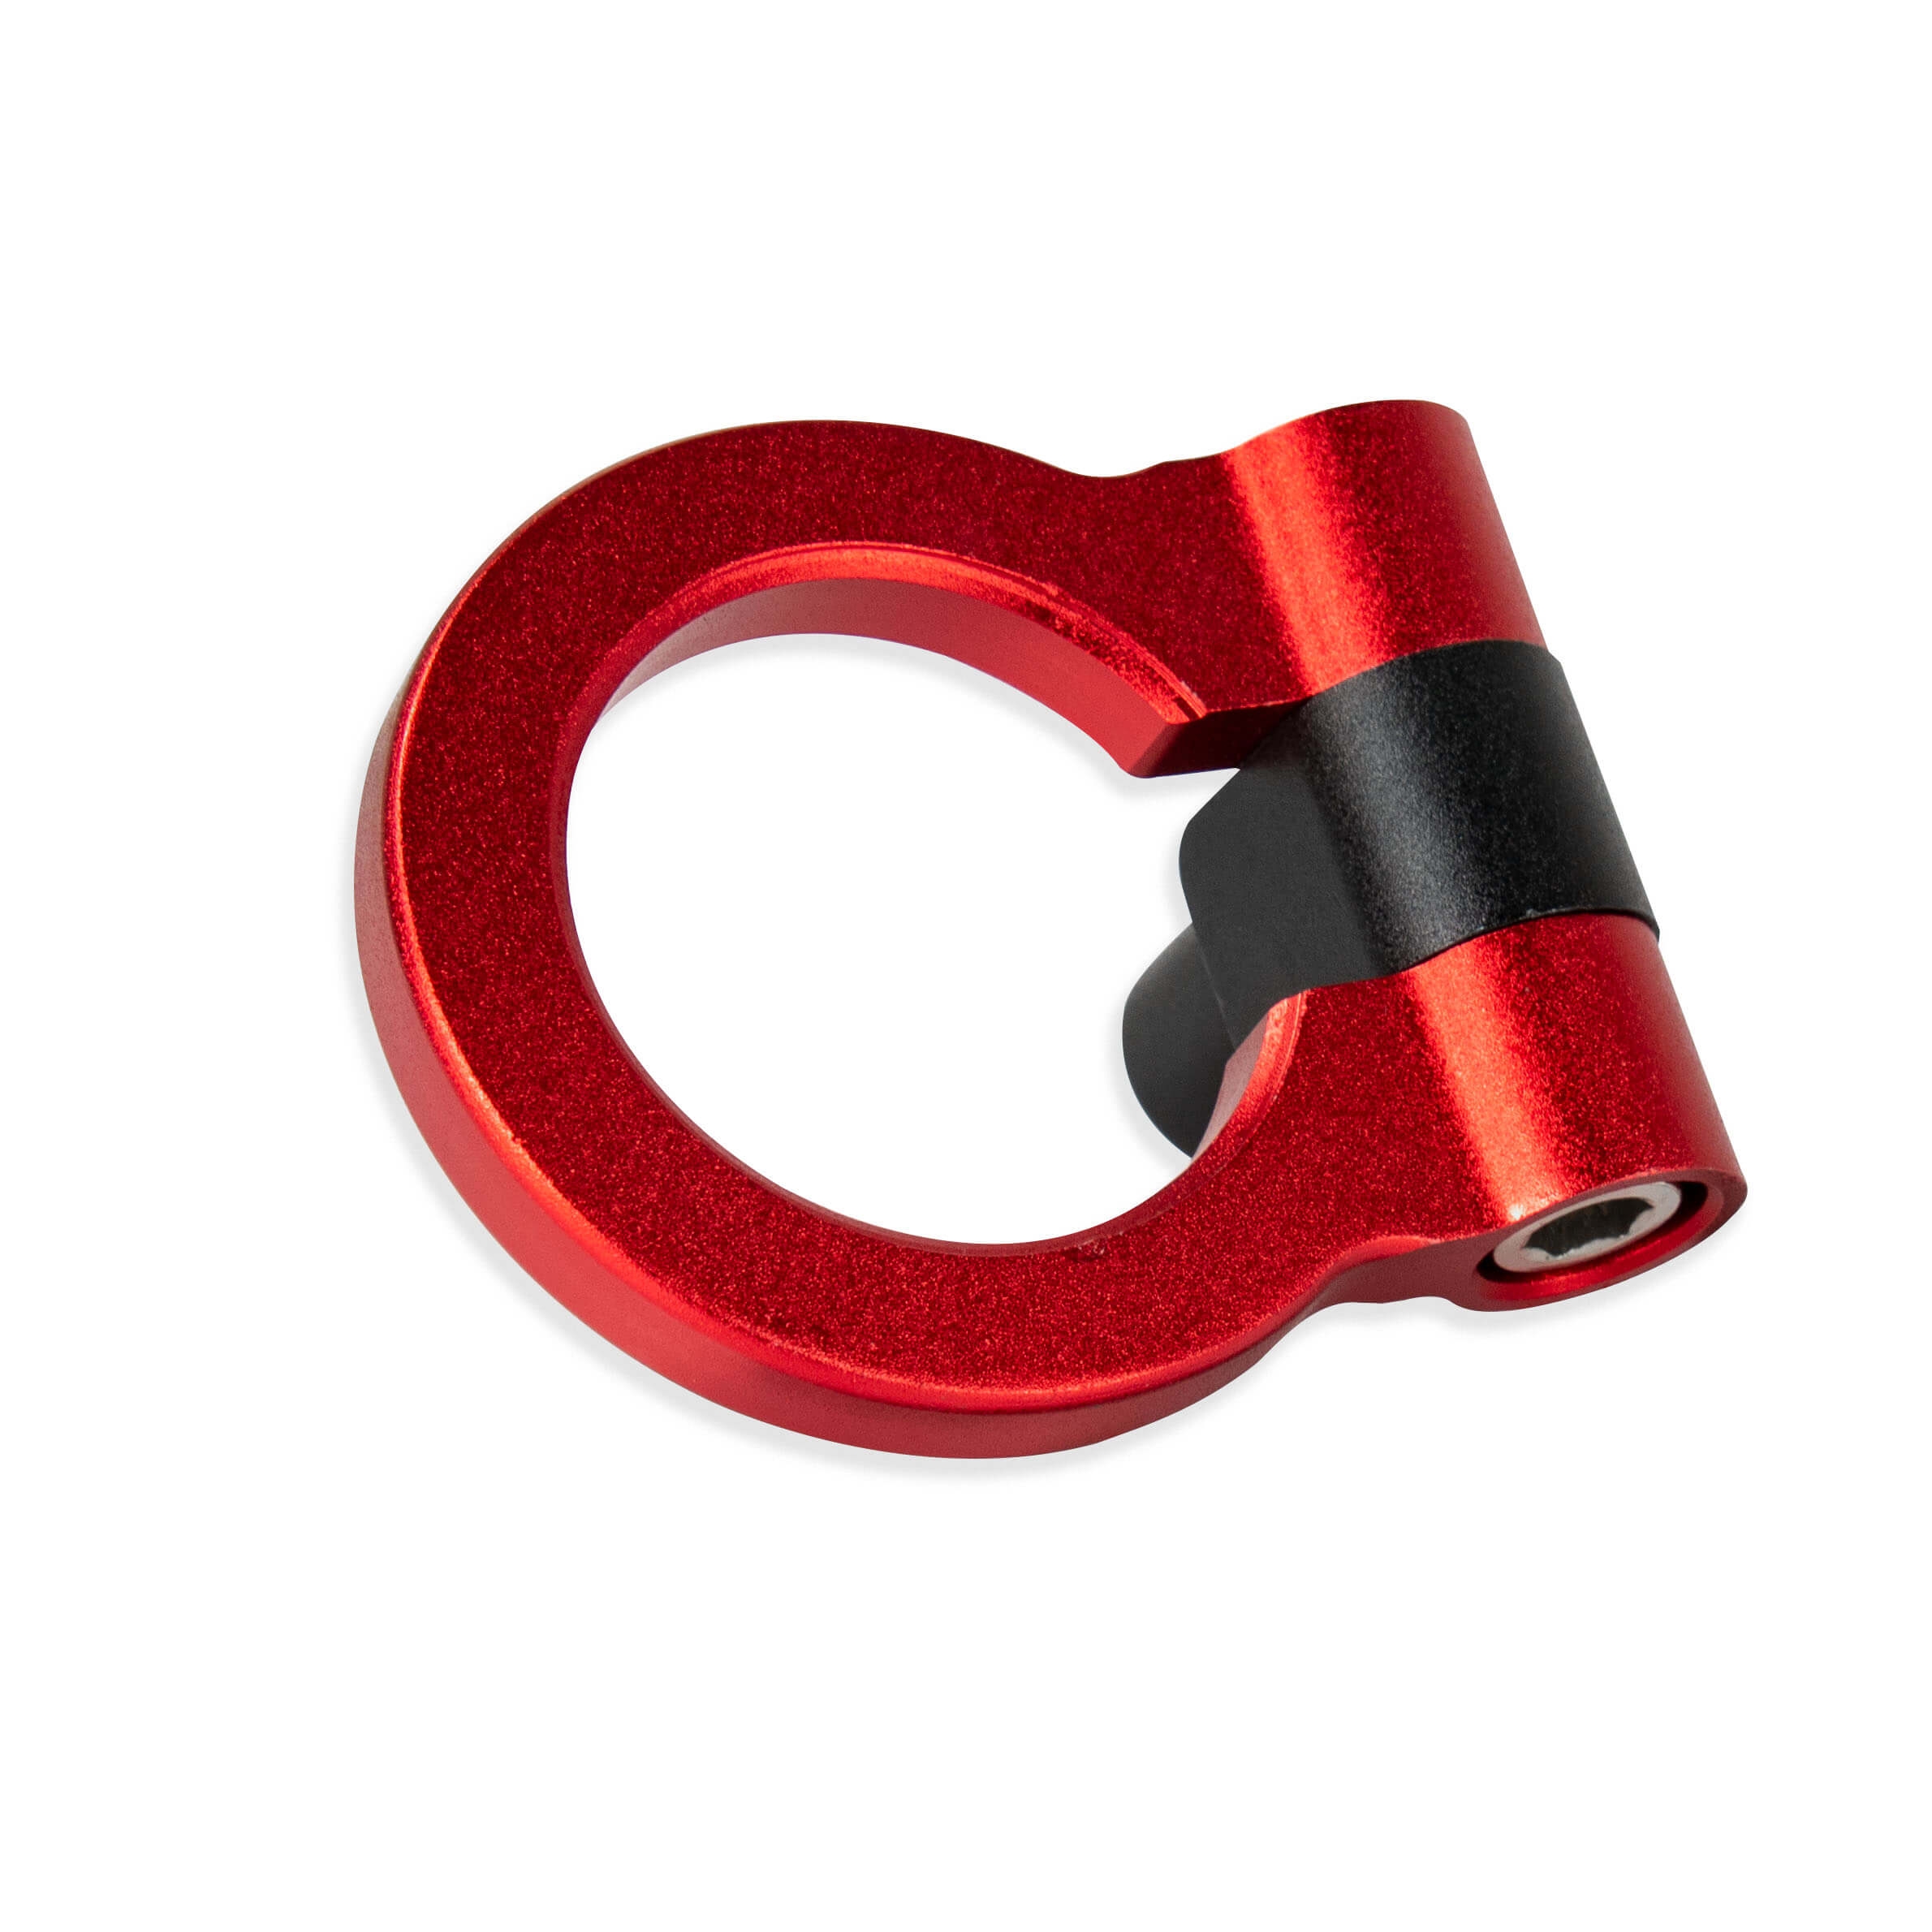 Rev up Your Motorsport Performance with Aluminum Tow Hook!